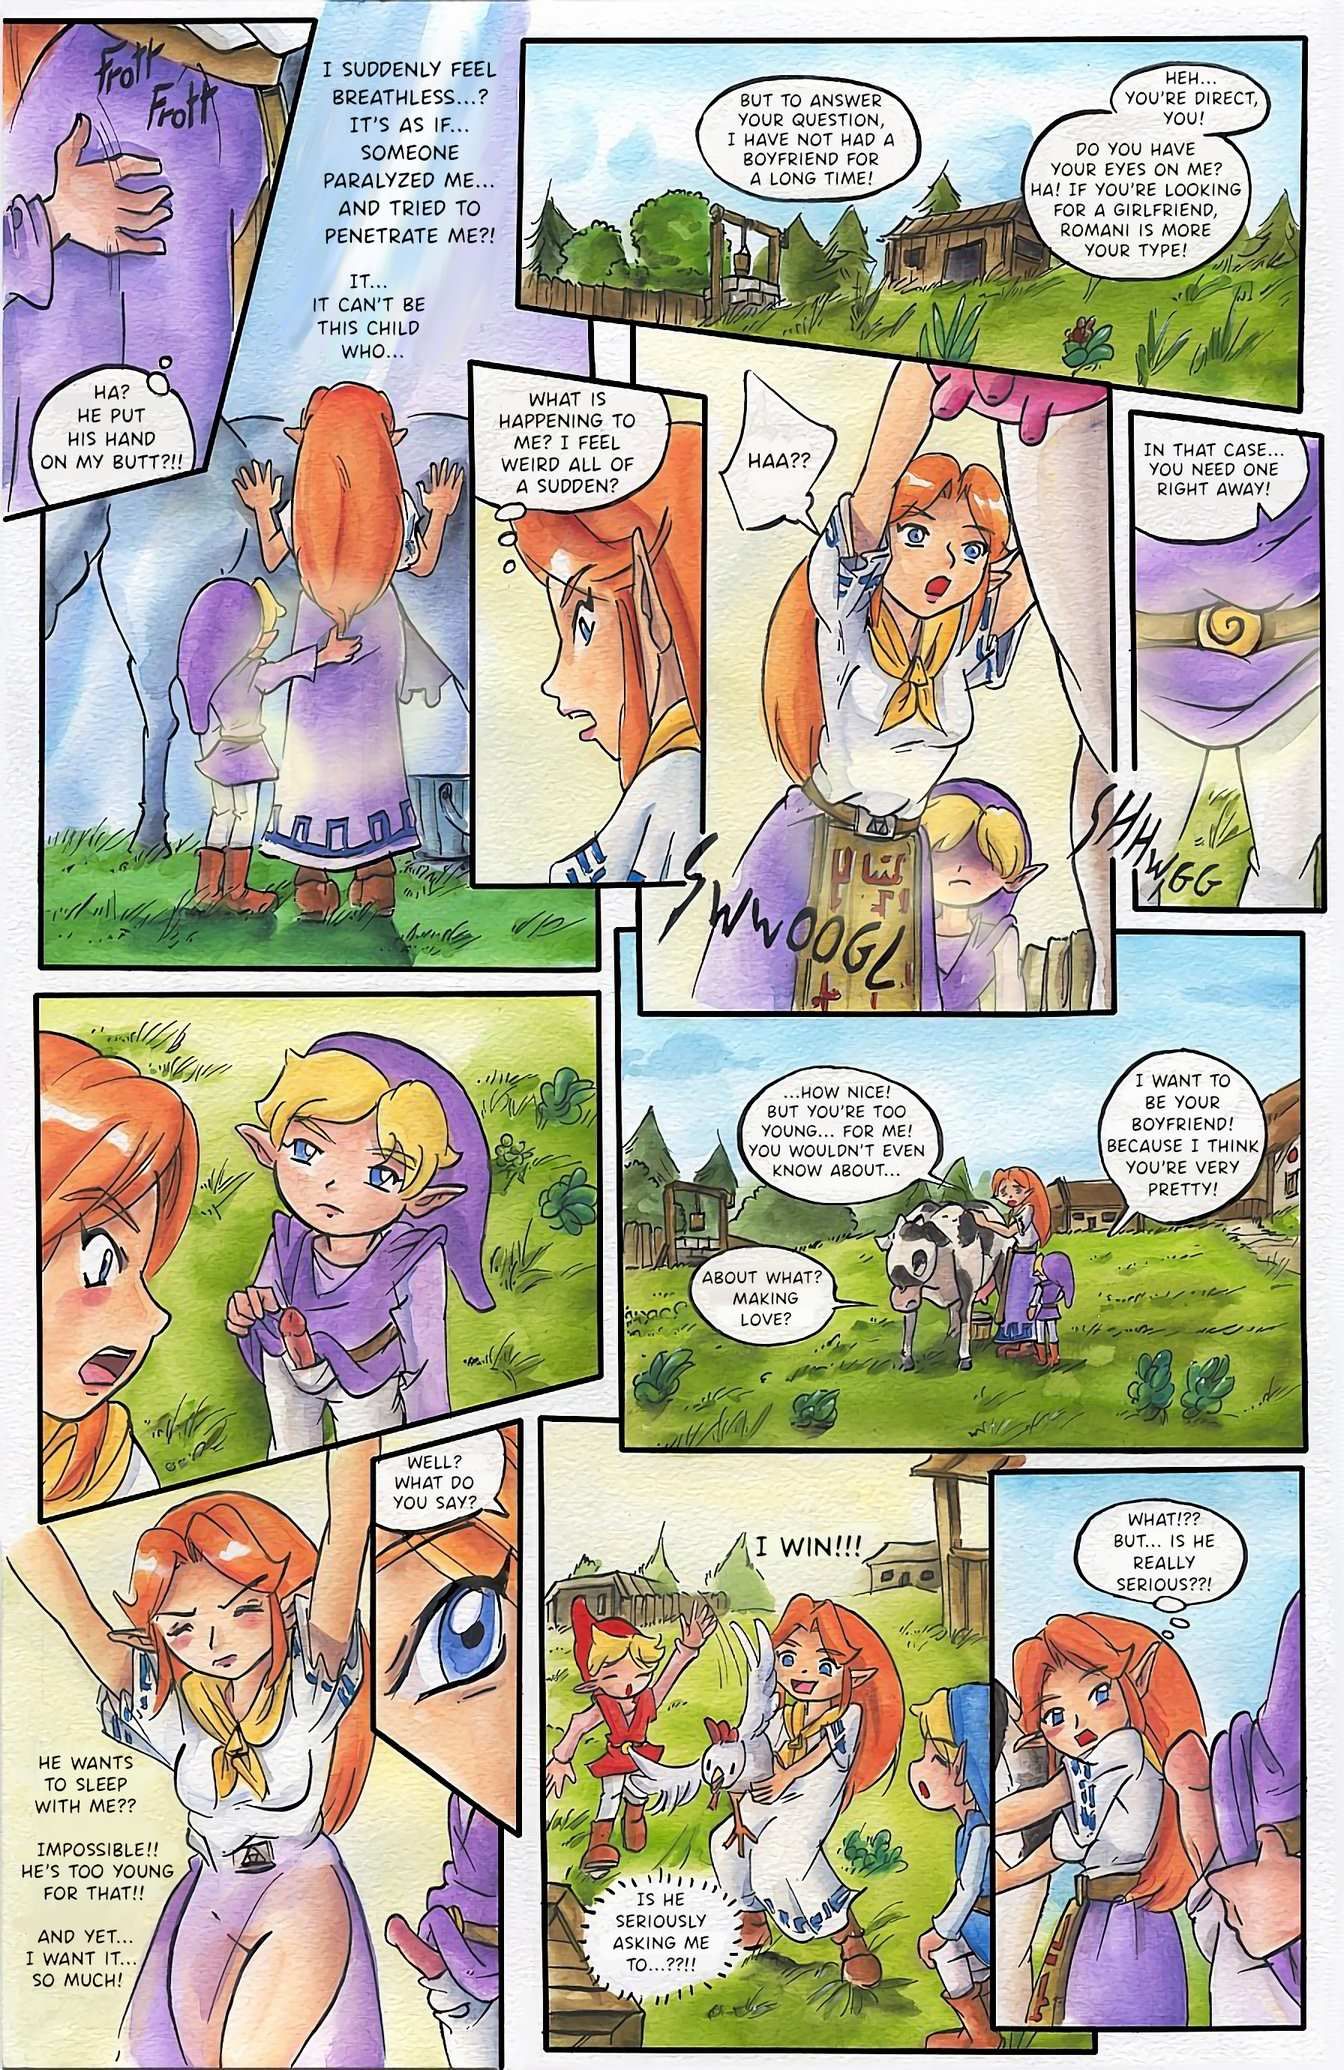 Sword page 4